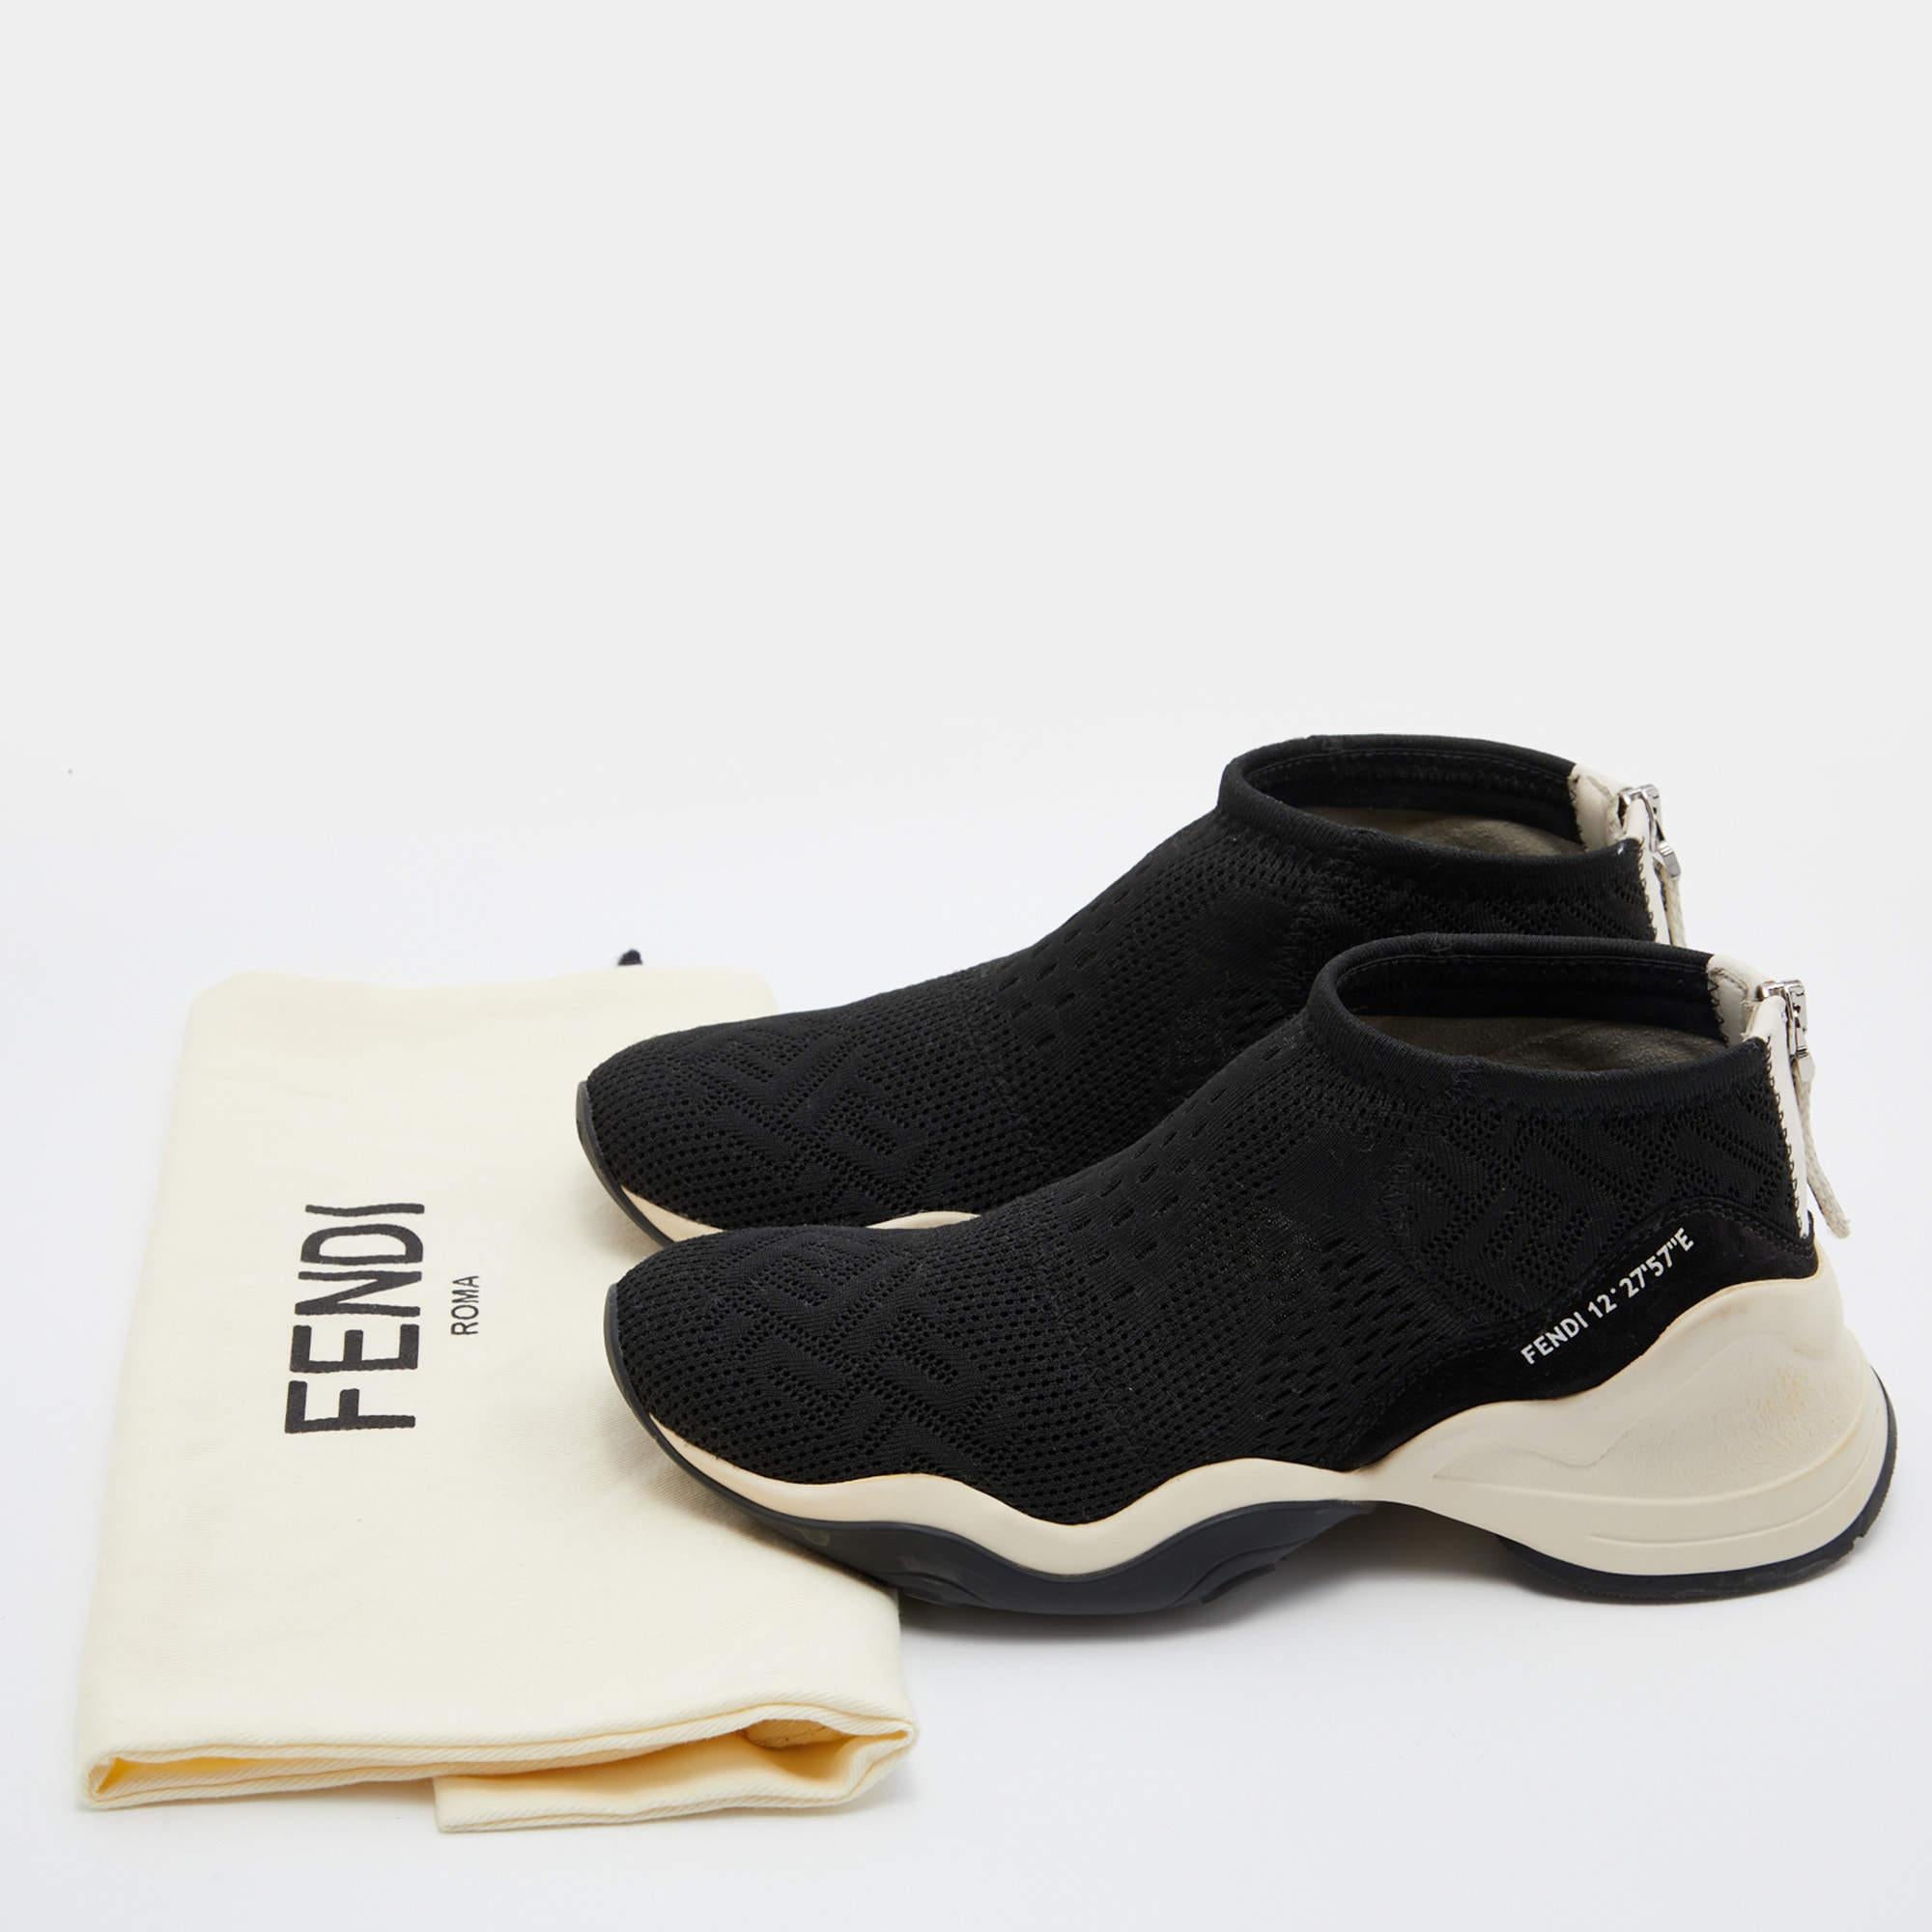 Fendi Black Knit Fabric and Suede FFluid Jacquard Sneakers Size 38 6